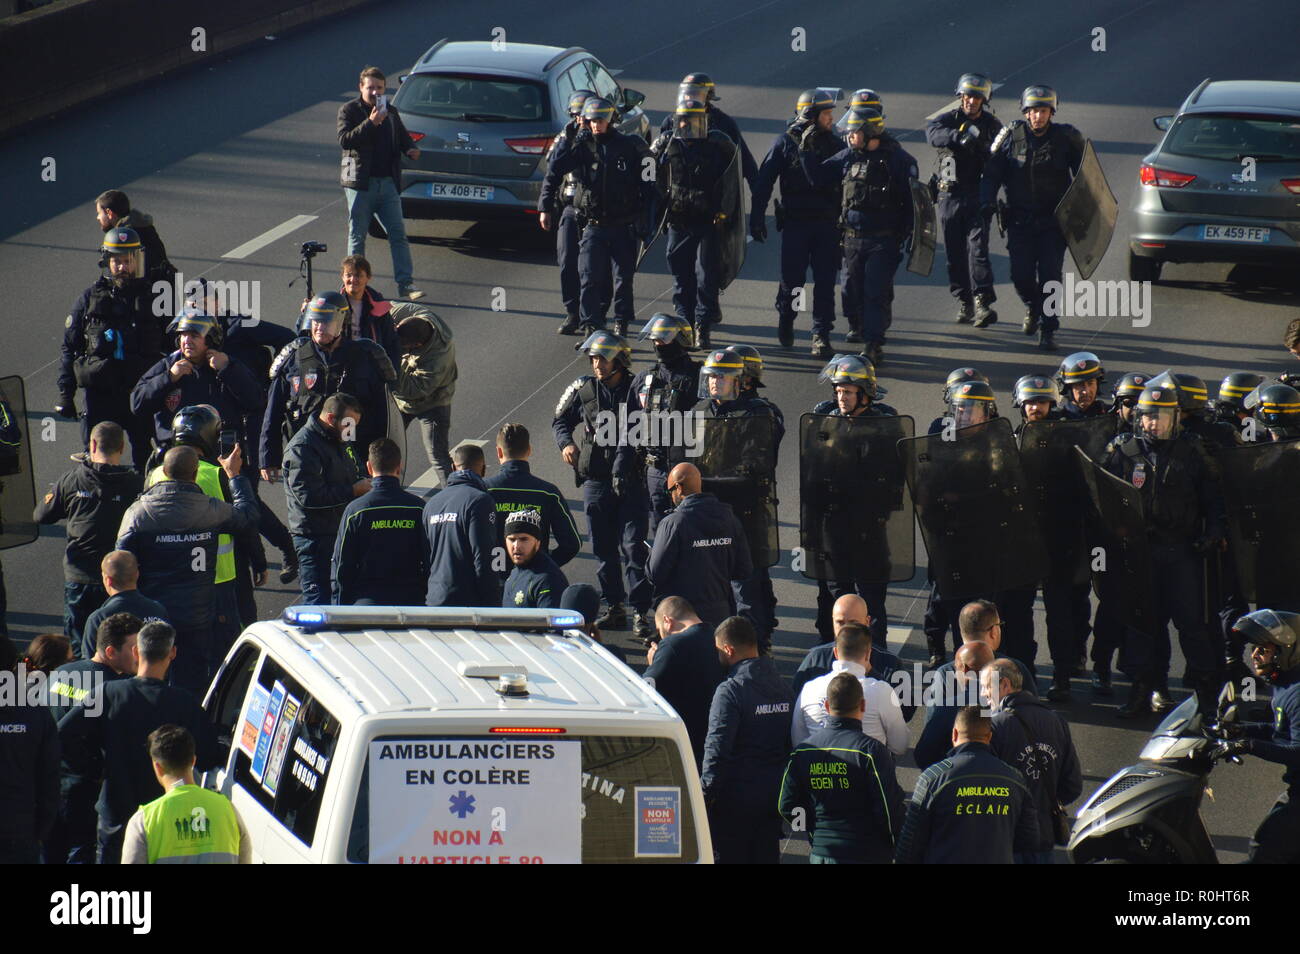 Paris, France. 5th Nov 2018. Riot Police v Paramedics. Paramedics protest against the Article 80 and organise a blocade with their ambulances on the peripheral ring roads of Paris to denounce their bad conditions of work. 5 November 2018.  ALPHACIT NEWIM / Alamy Live News Credit: Alphacit NEWIM/Alamy Live News Stock Photo